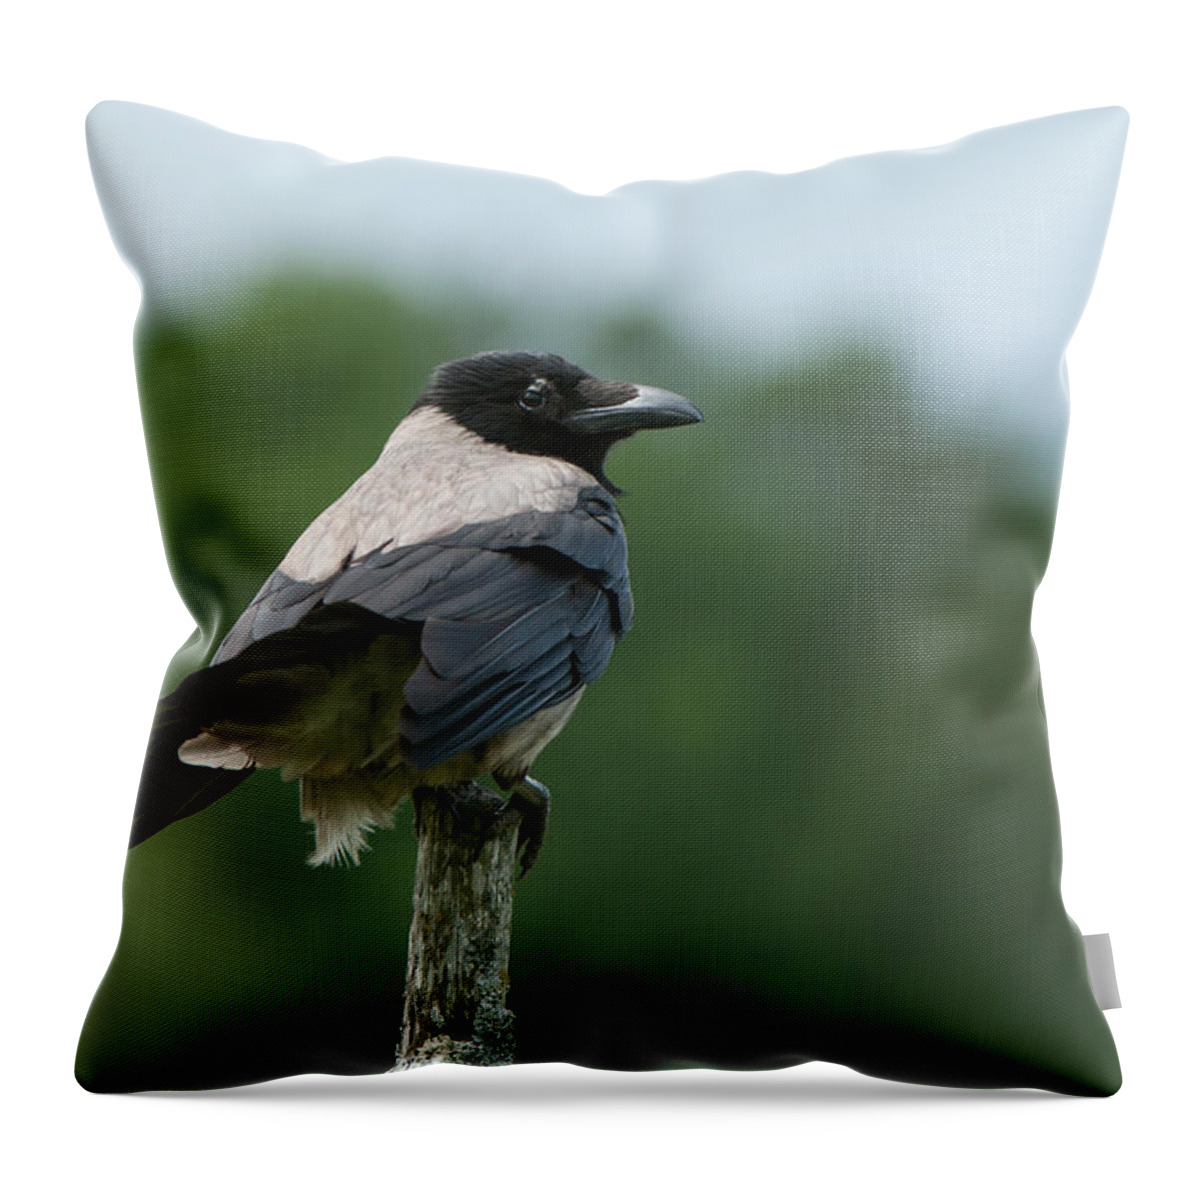 Hoodiecrow Throw Pillow featuring the photograph Hoodiecrow by Torbjorn Swenelius